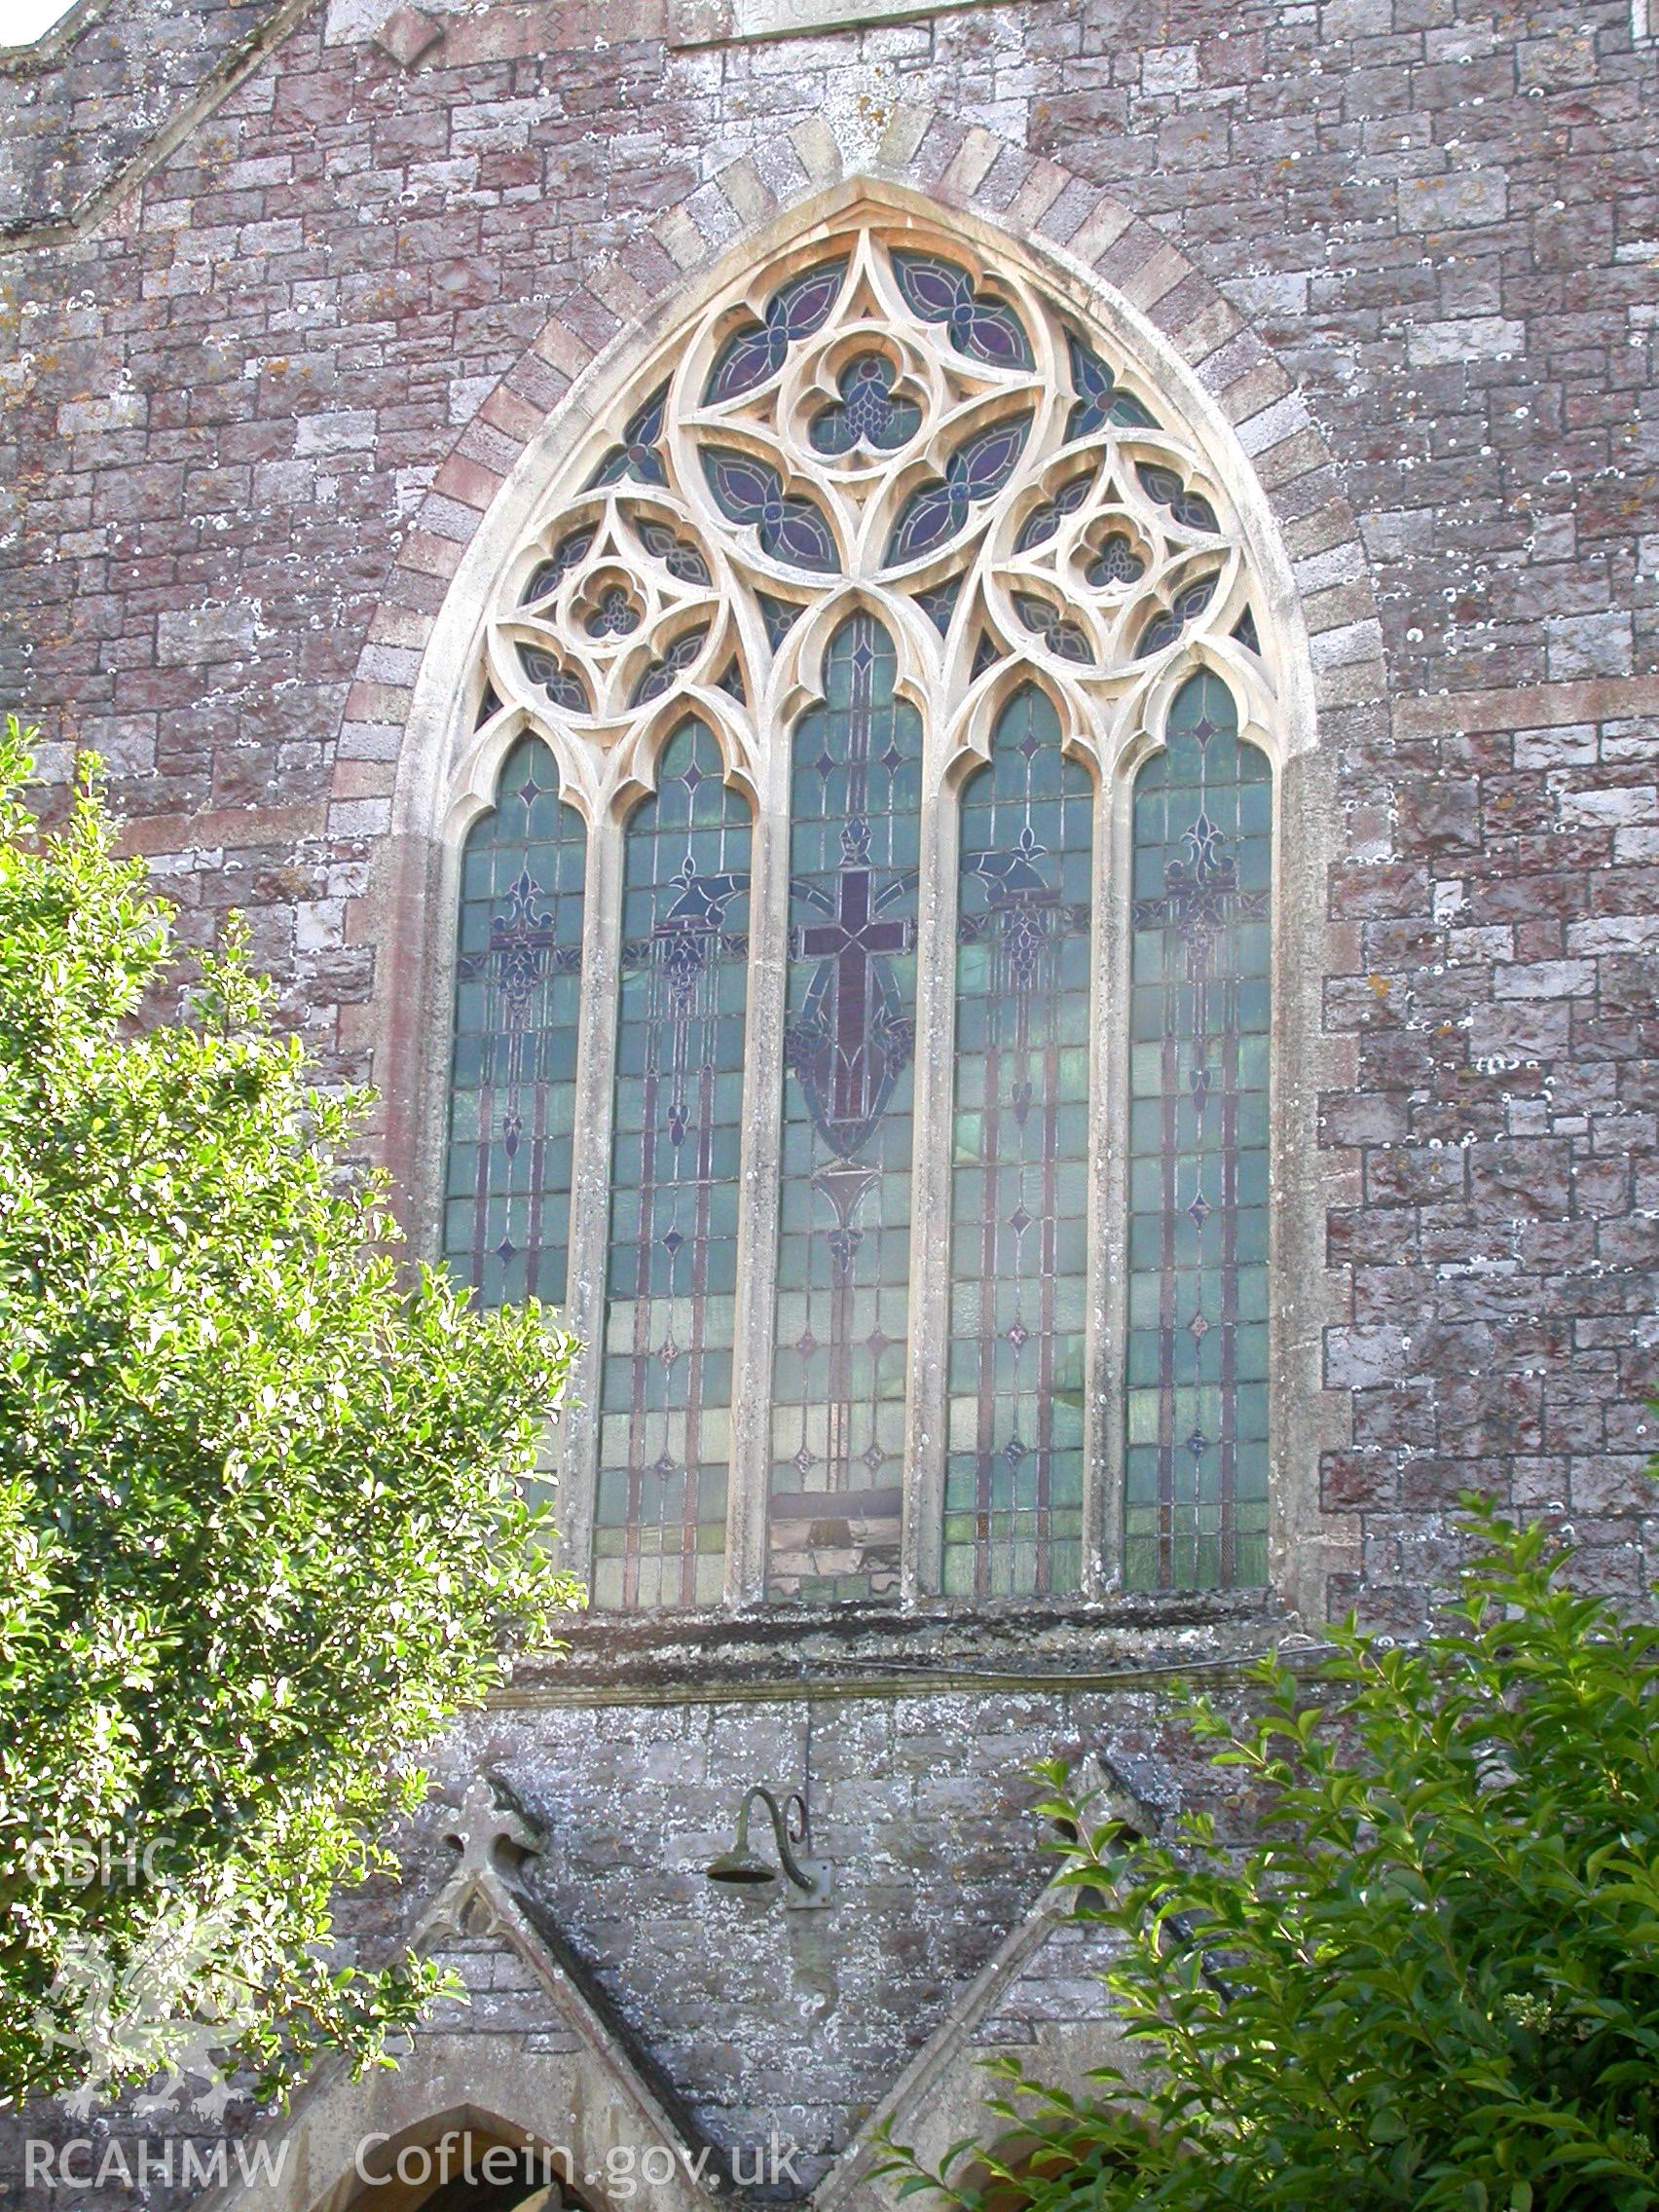 Main north-east window with idiosyncratic decorated gothic.